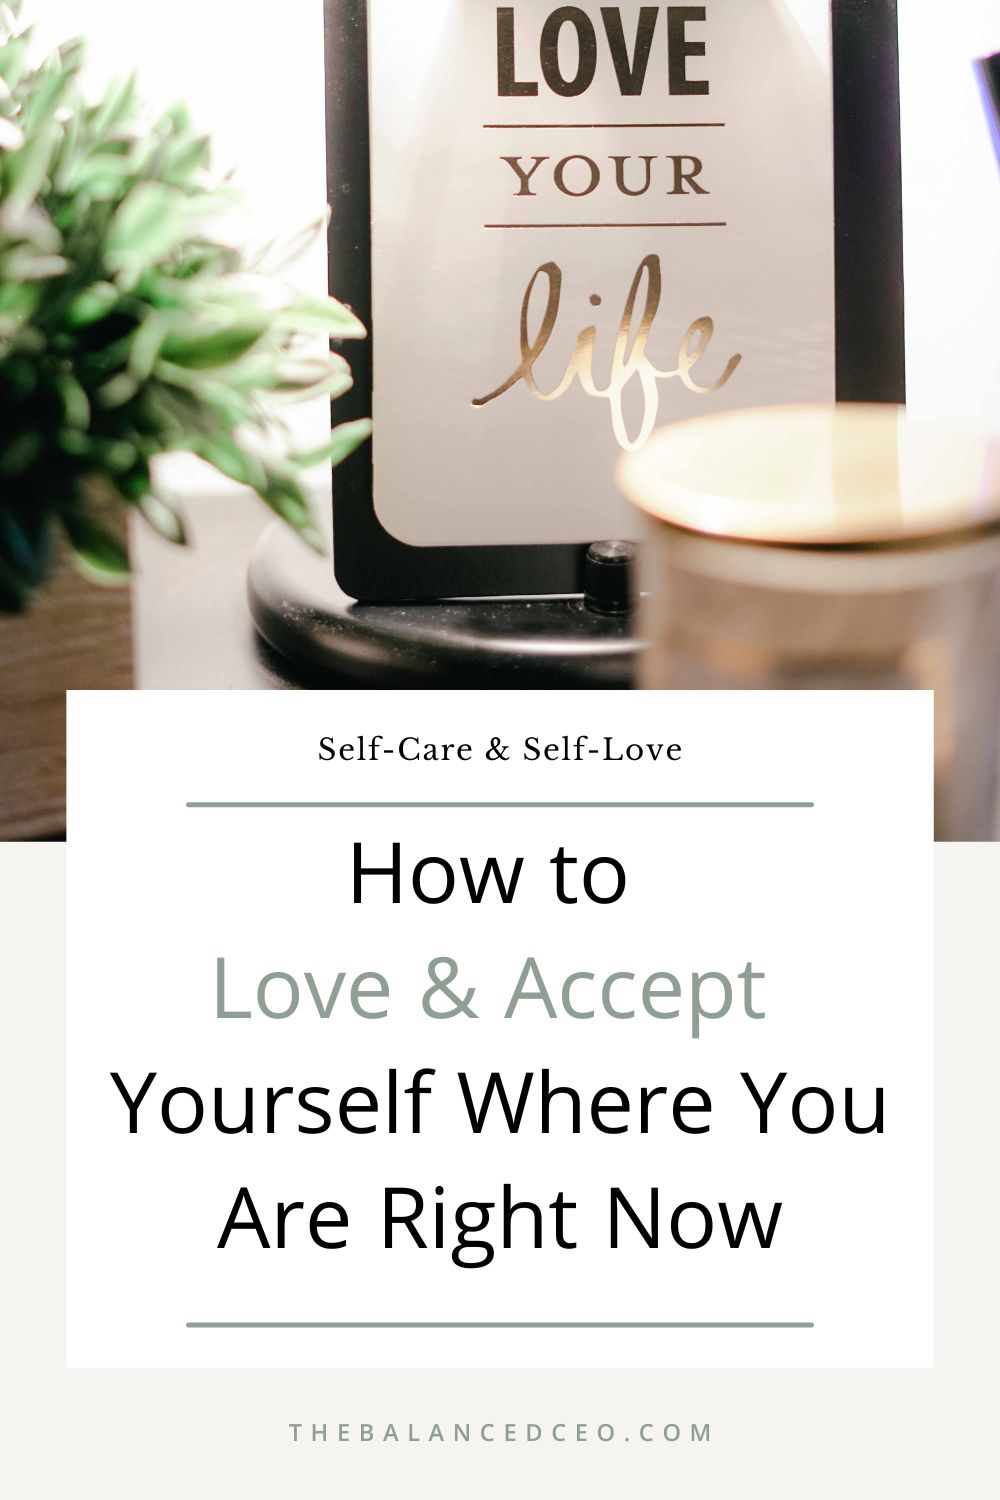 How to Love and Accept Yourself Where You Are Right Now